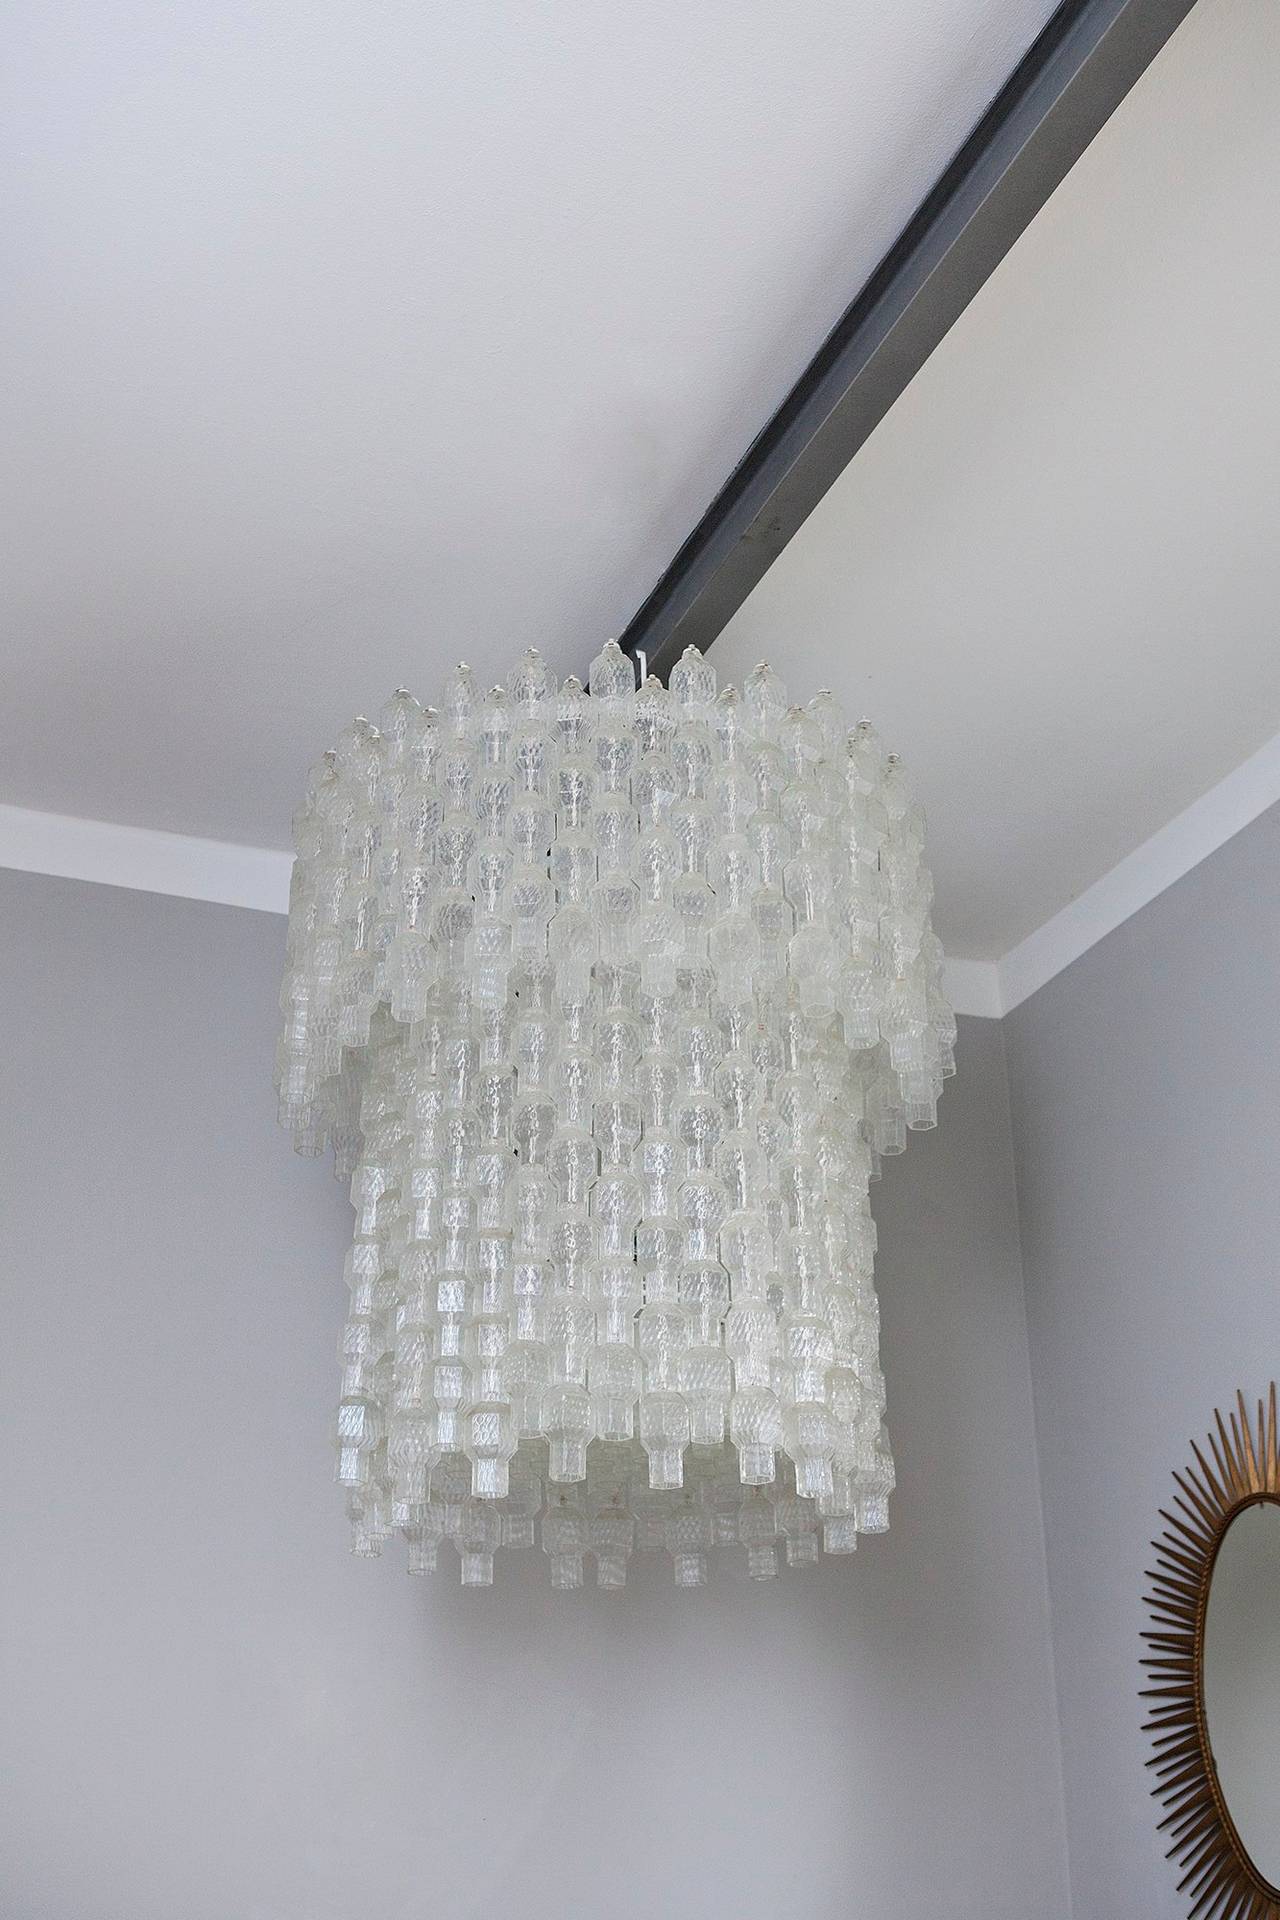 Very big wonderful shining chandelier by Archimede Seguso, Italy circa 1955, Prod. Seguso Murano, hundreds of Murano glass strands mounted on solid metal suspension, newly electrified.
All glasses are in a perfect condition.
Measures: Diameter 100